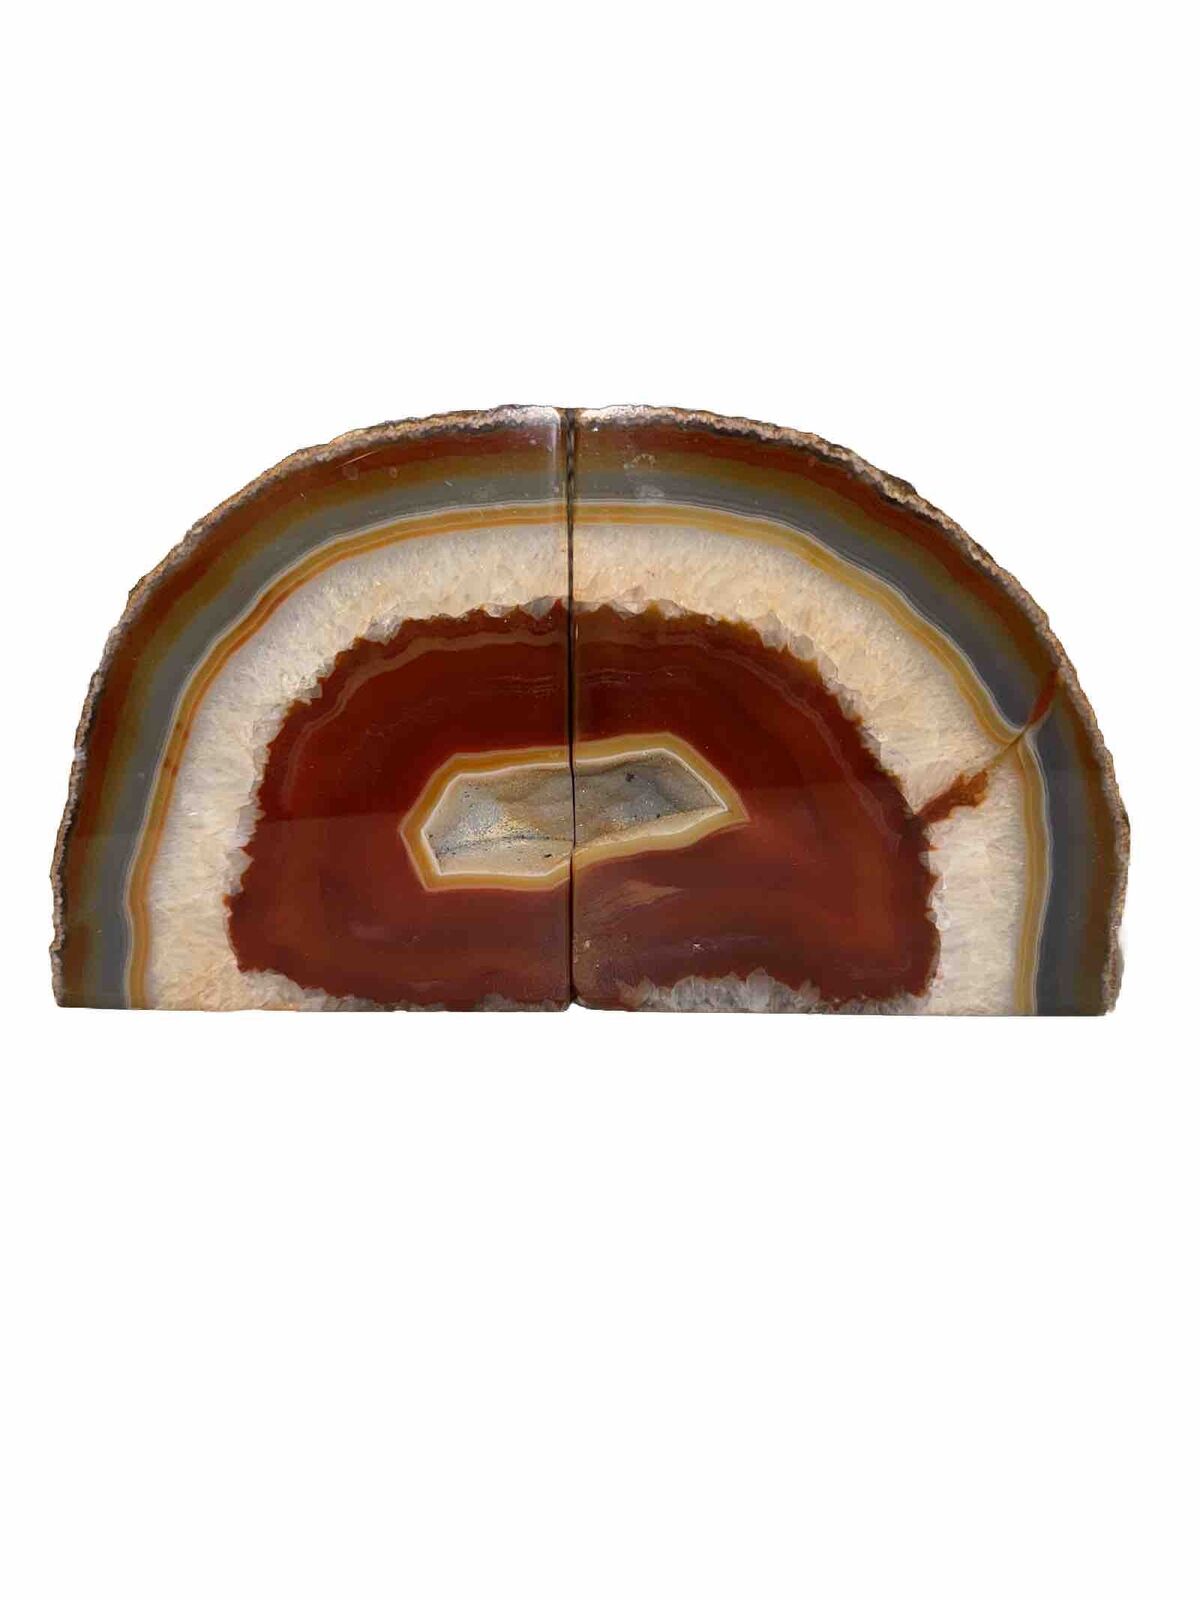 Amazing RARE Banded Brown Agate Geode Natural Gem Stone Bookends  6”x 4”